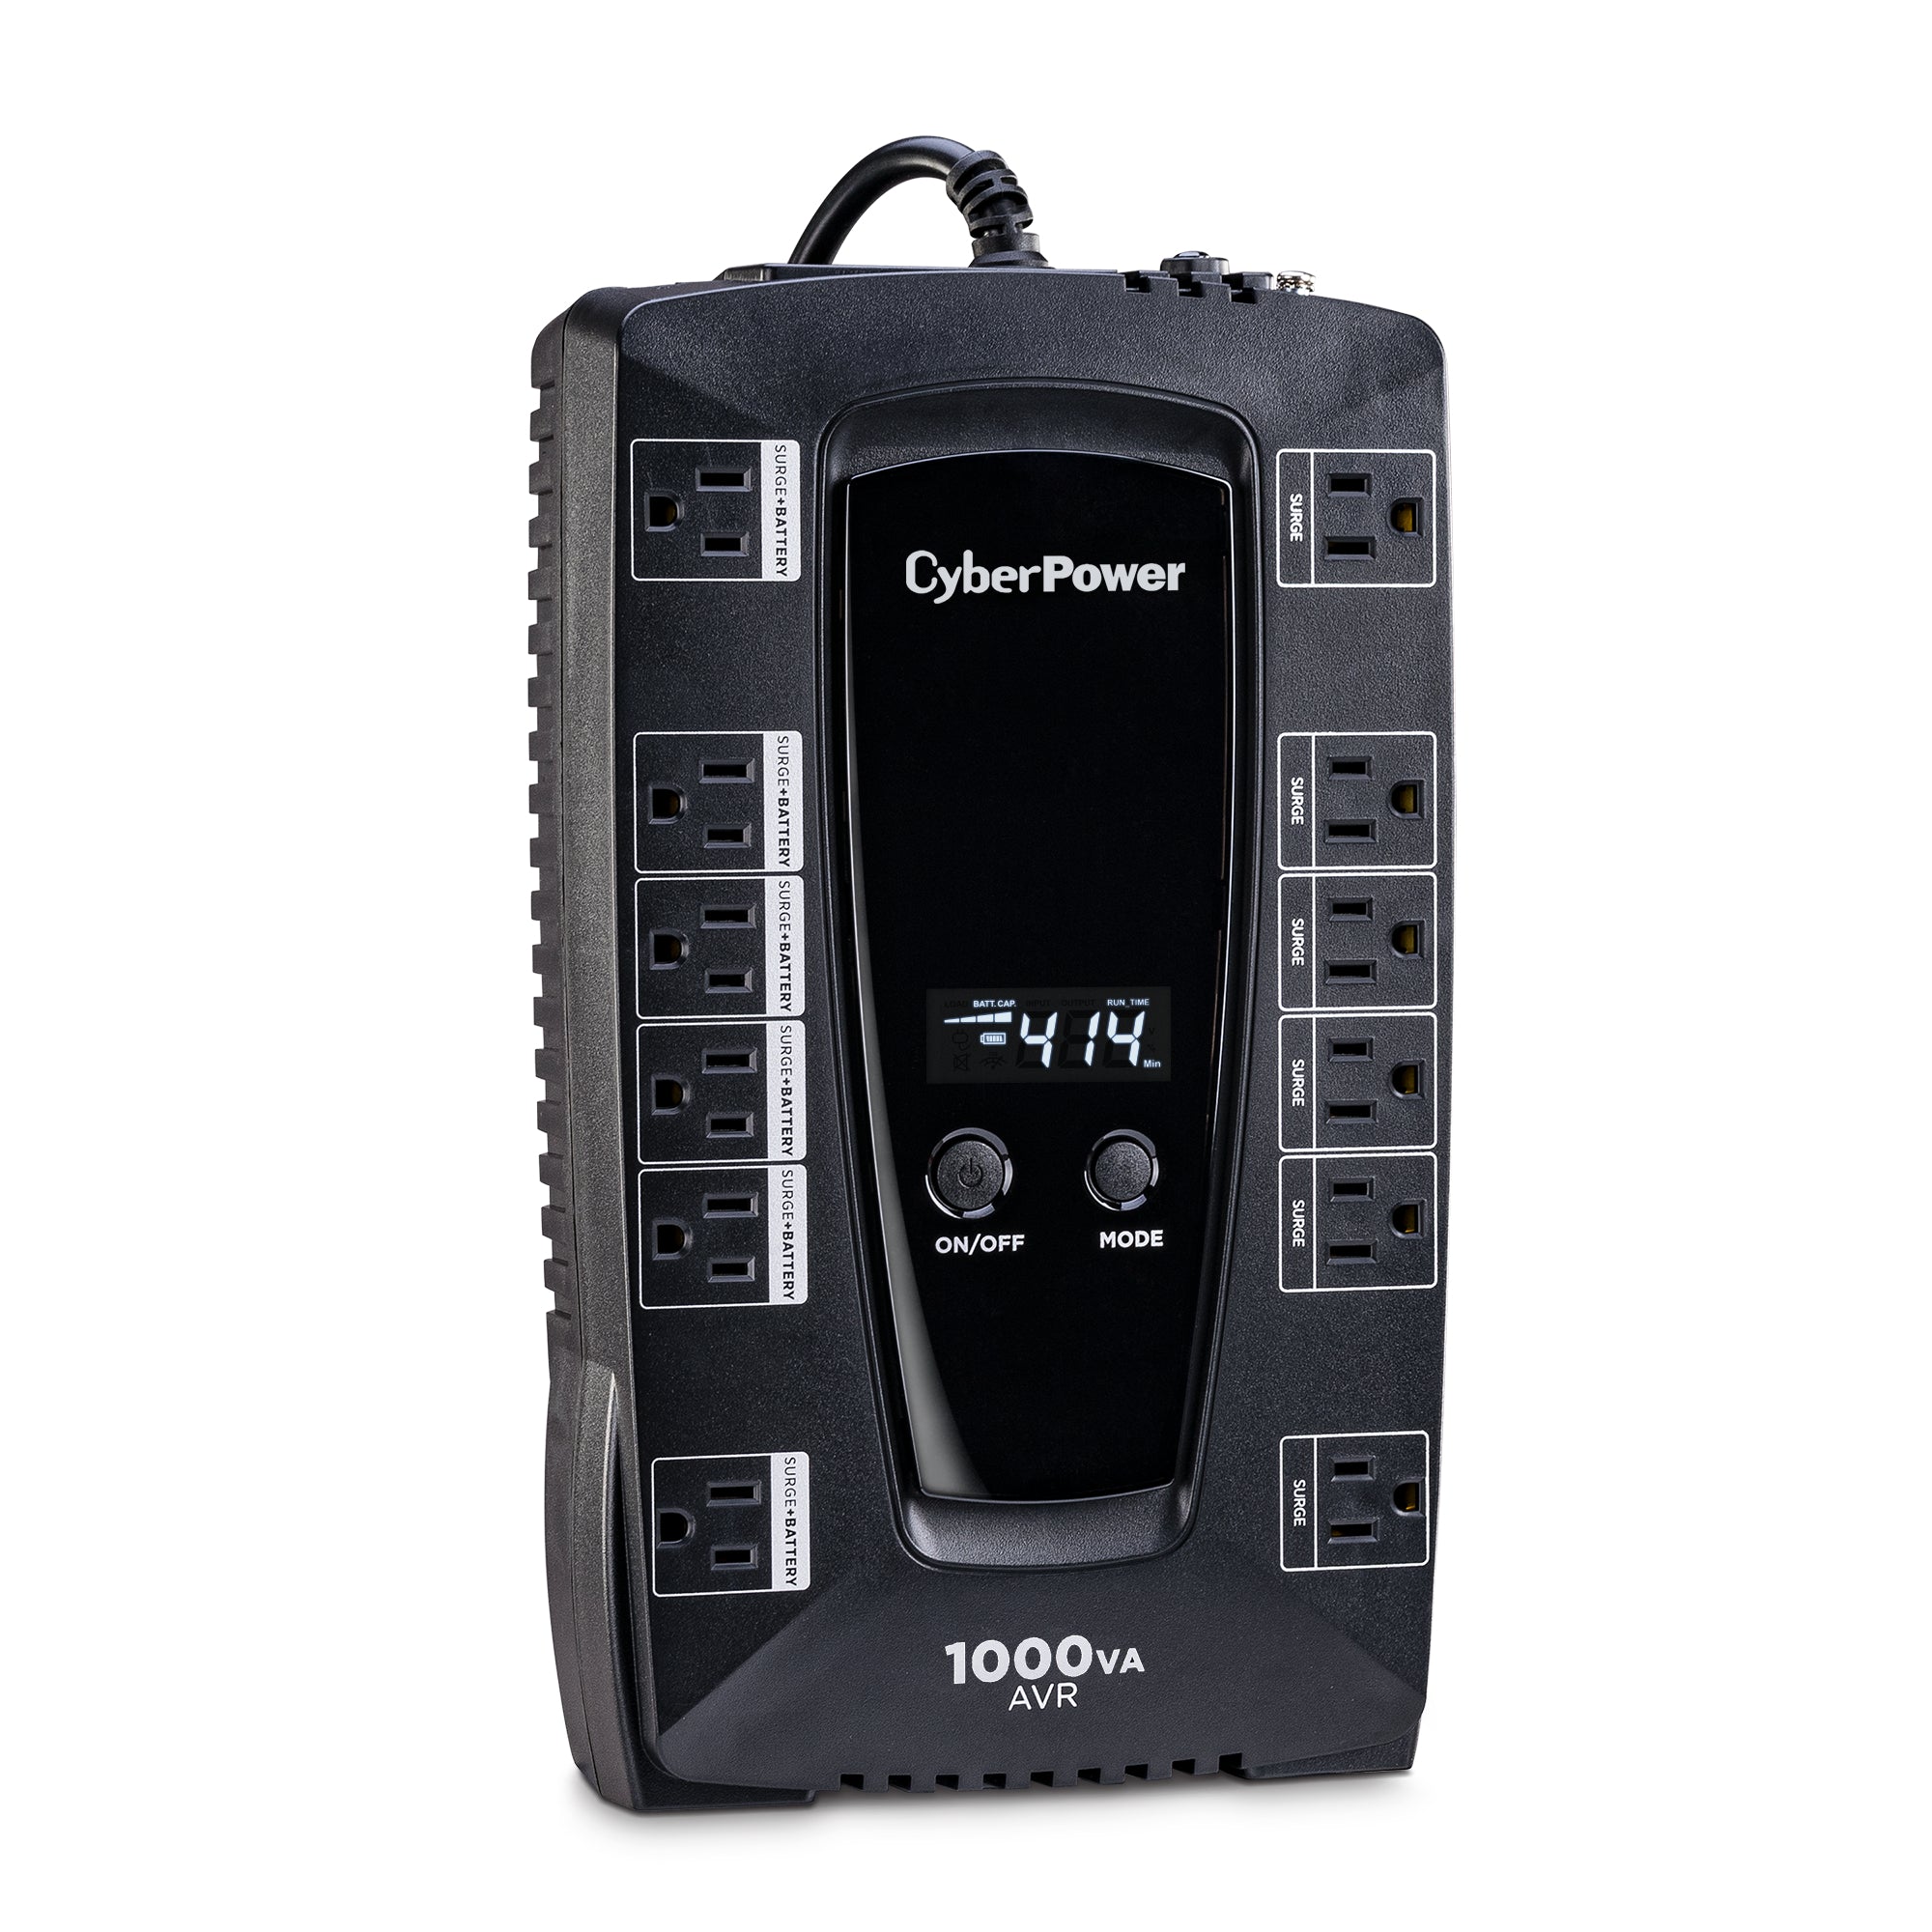 CyberPower LE1000DG-R 1000VA 120-Volt 12-Outlet LCD Display UPS Battery Backup - Certified Refurbished